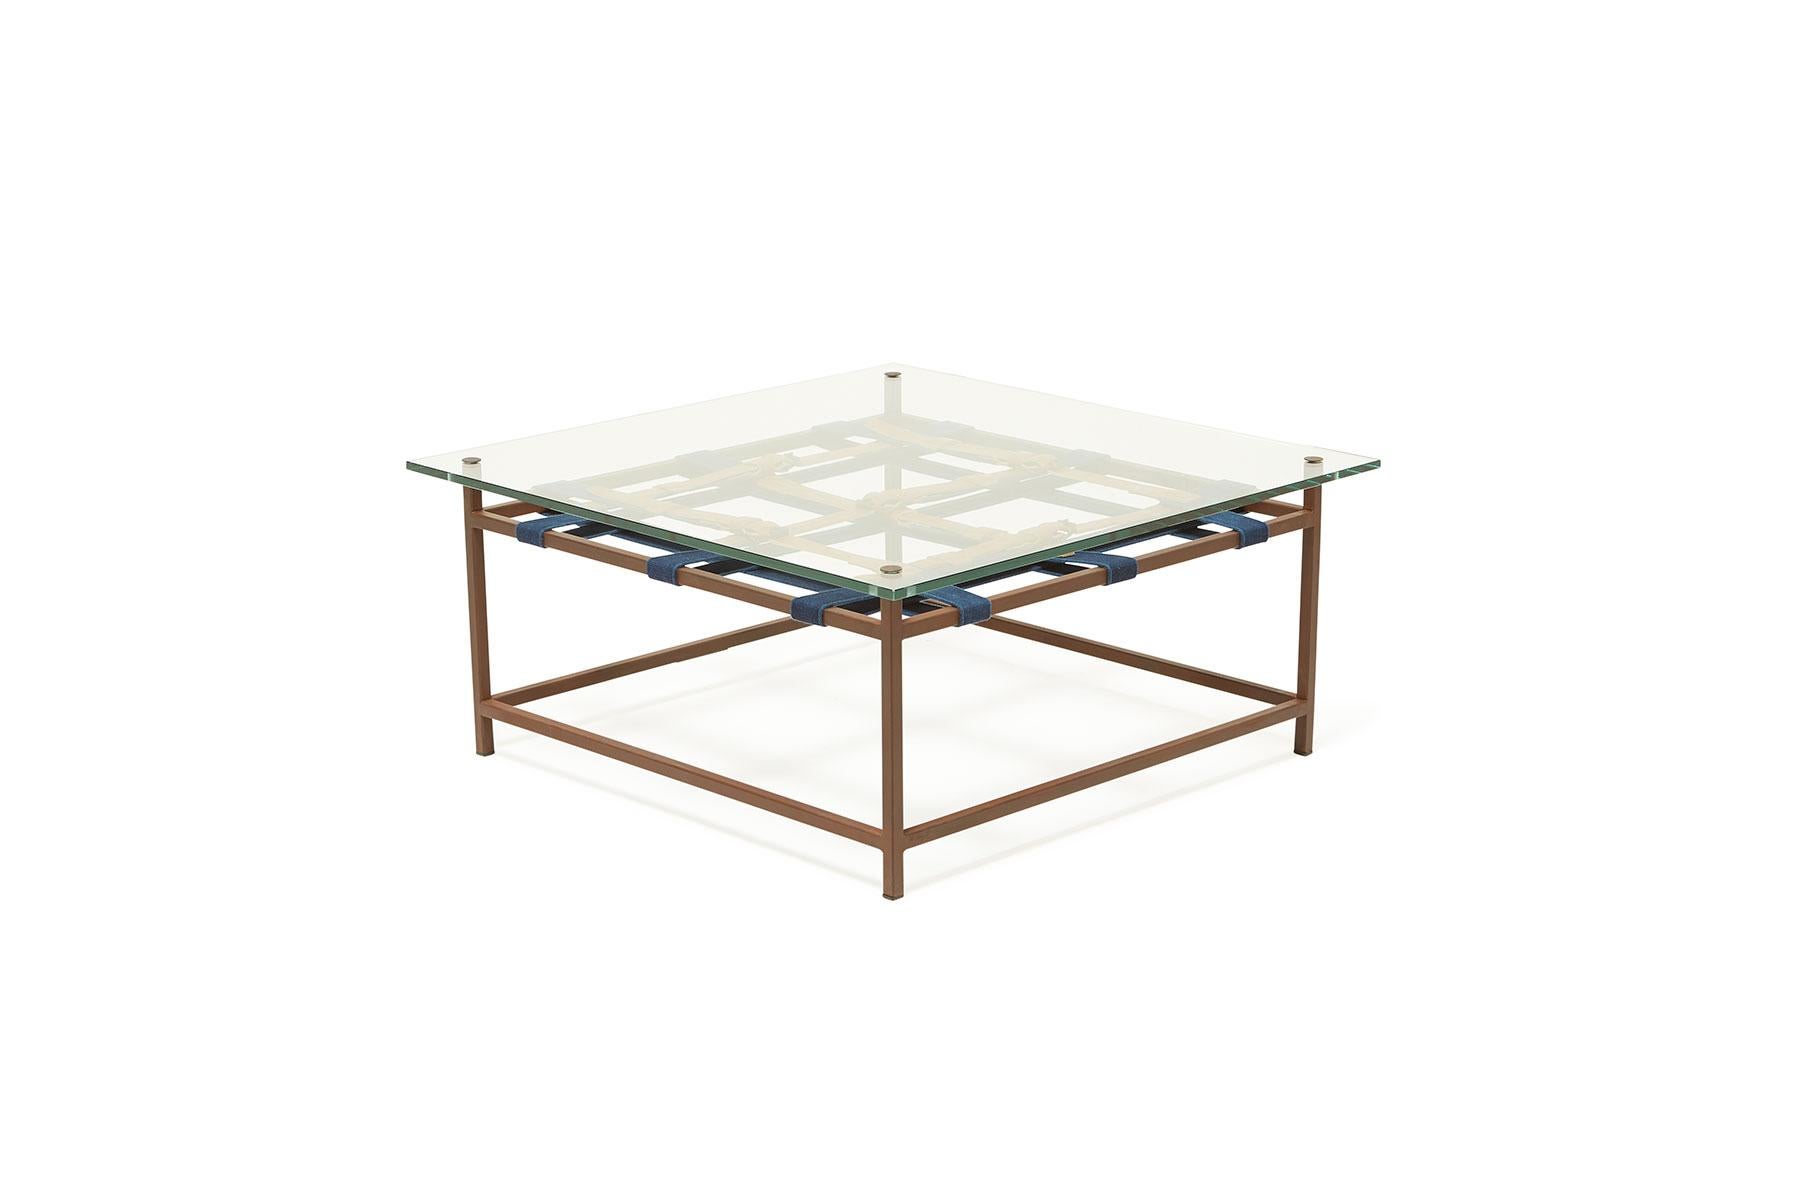 American Glass and Marbled Rust Coffee Table with Cognac and Indigo Belts For Sale